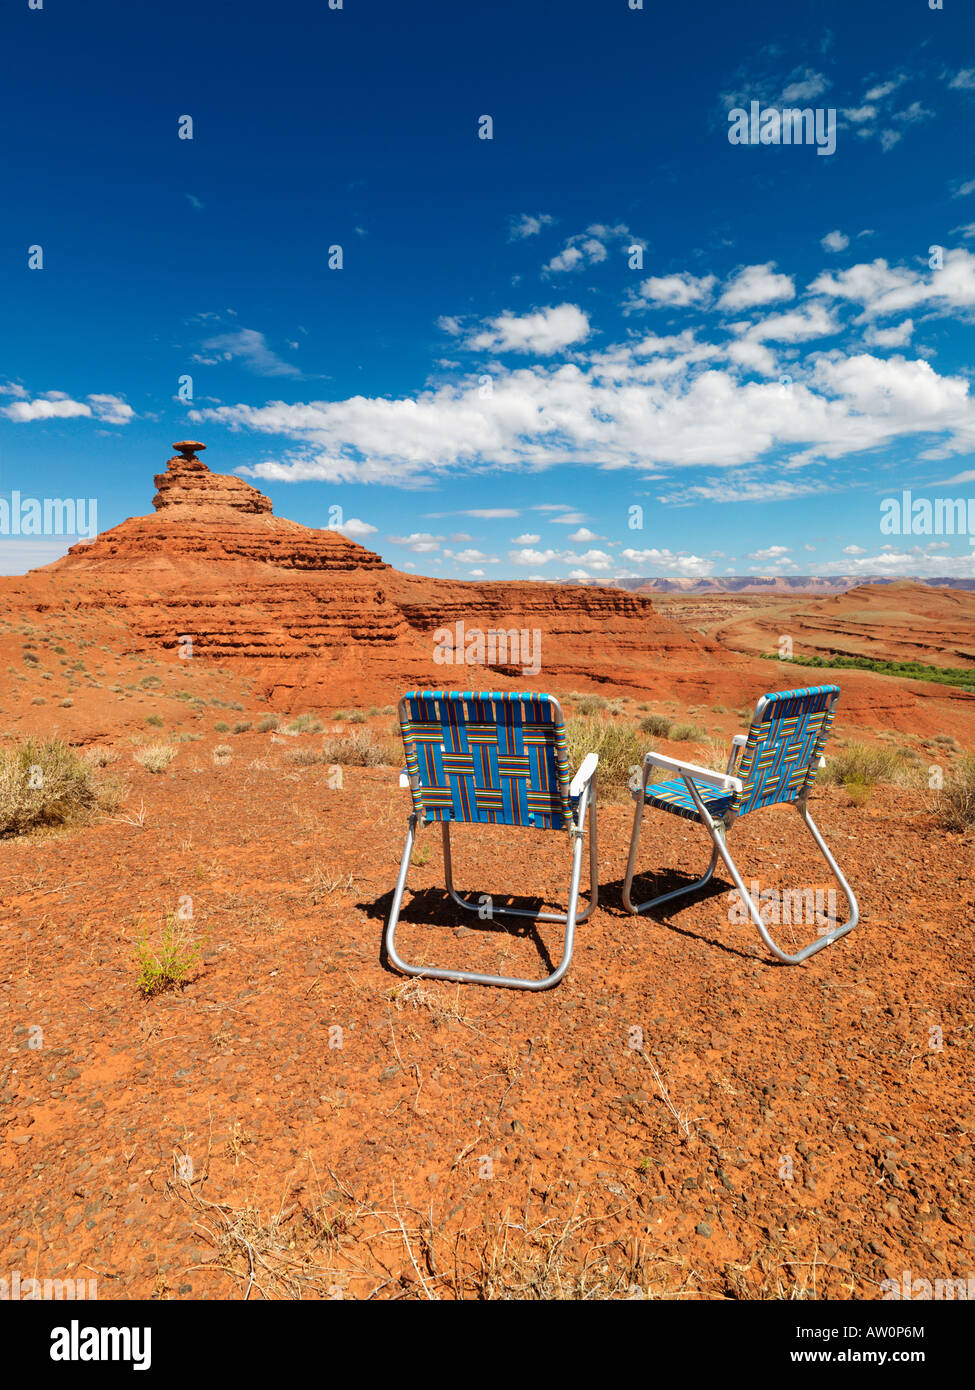 Lawn chairs in desert. Stock Photo